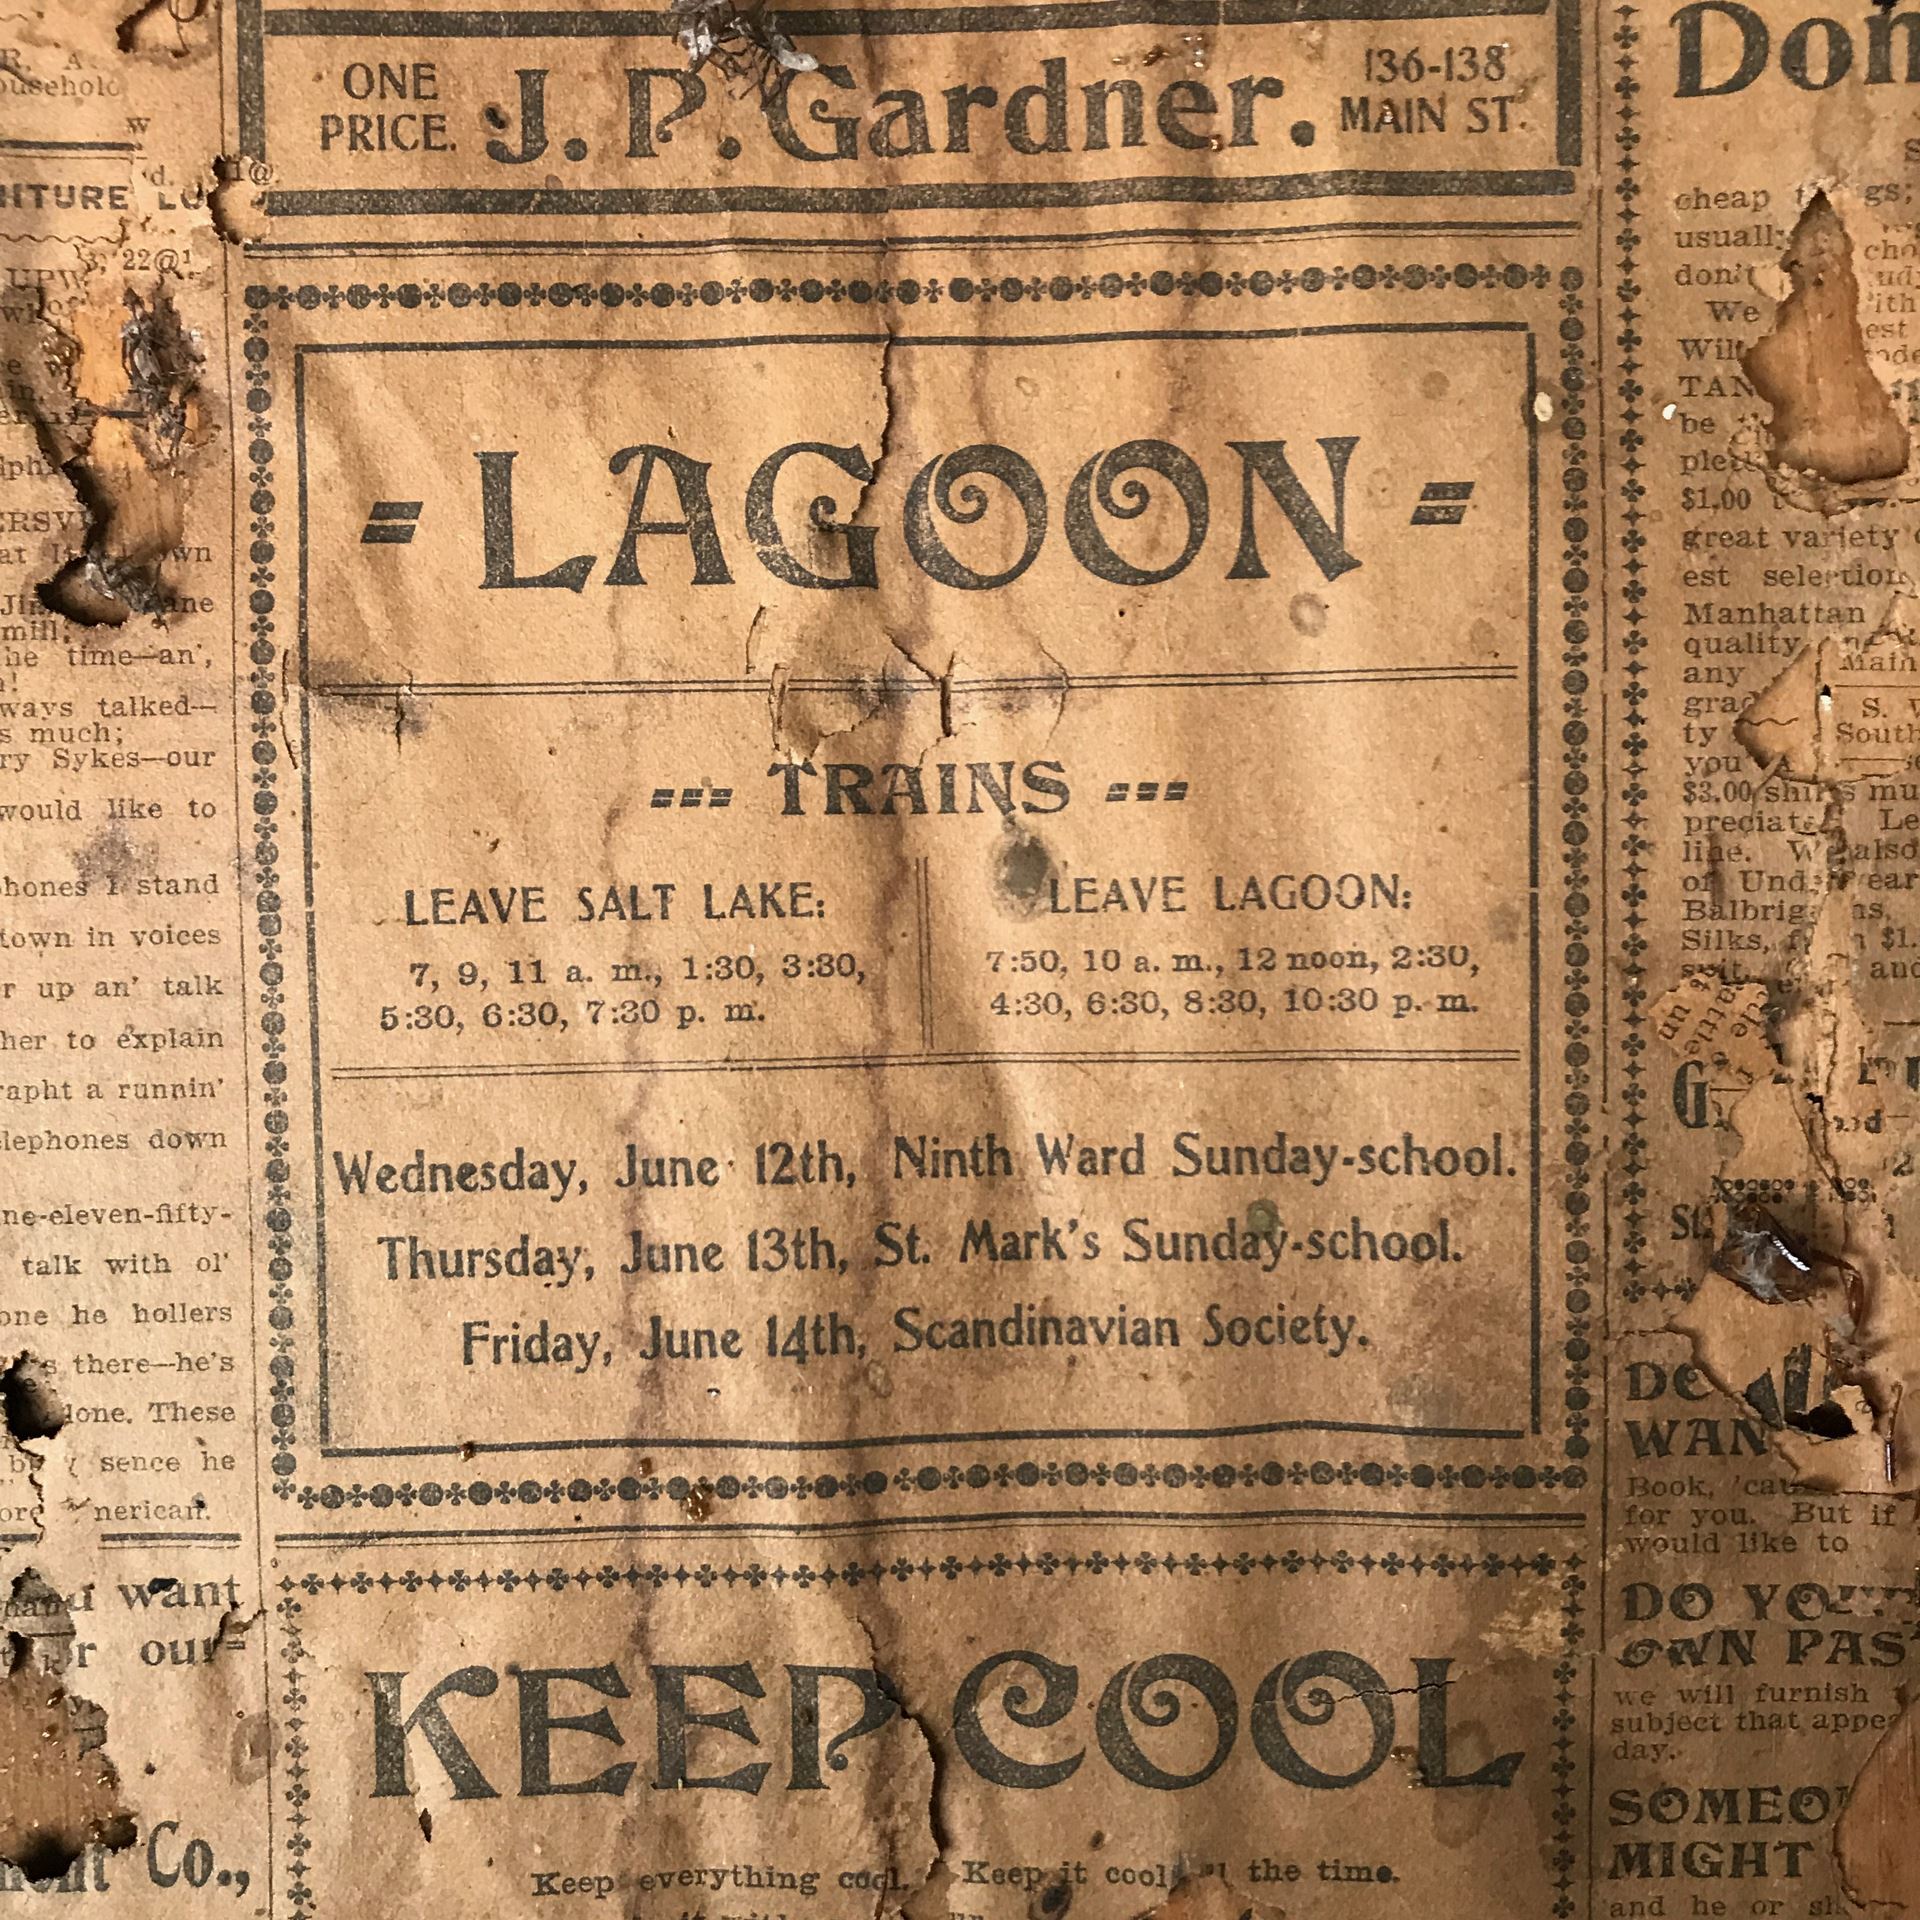 - A section from the newspaper insulation showing the Lagoon train schedule.